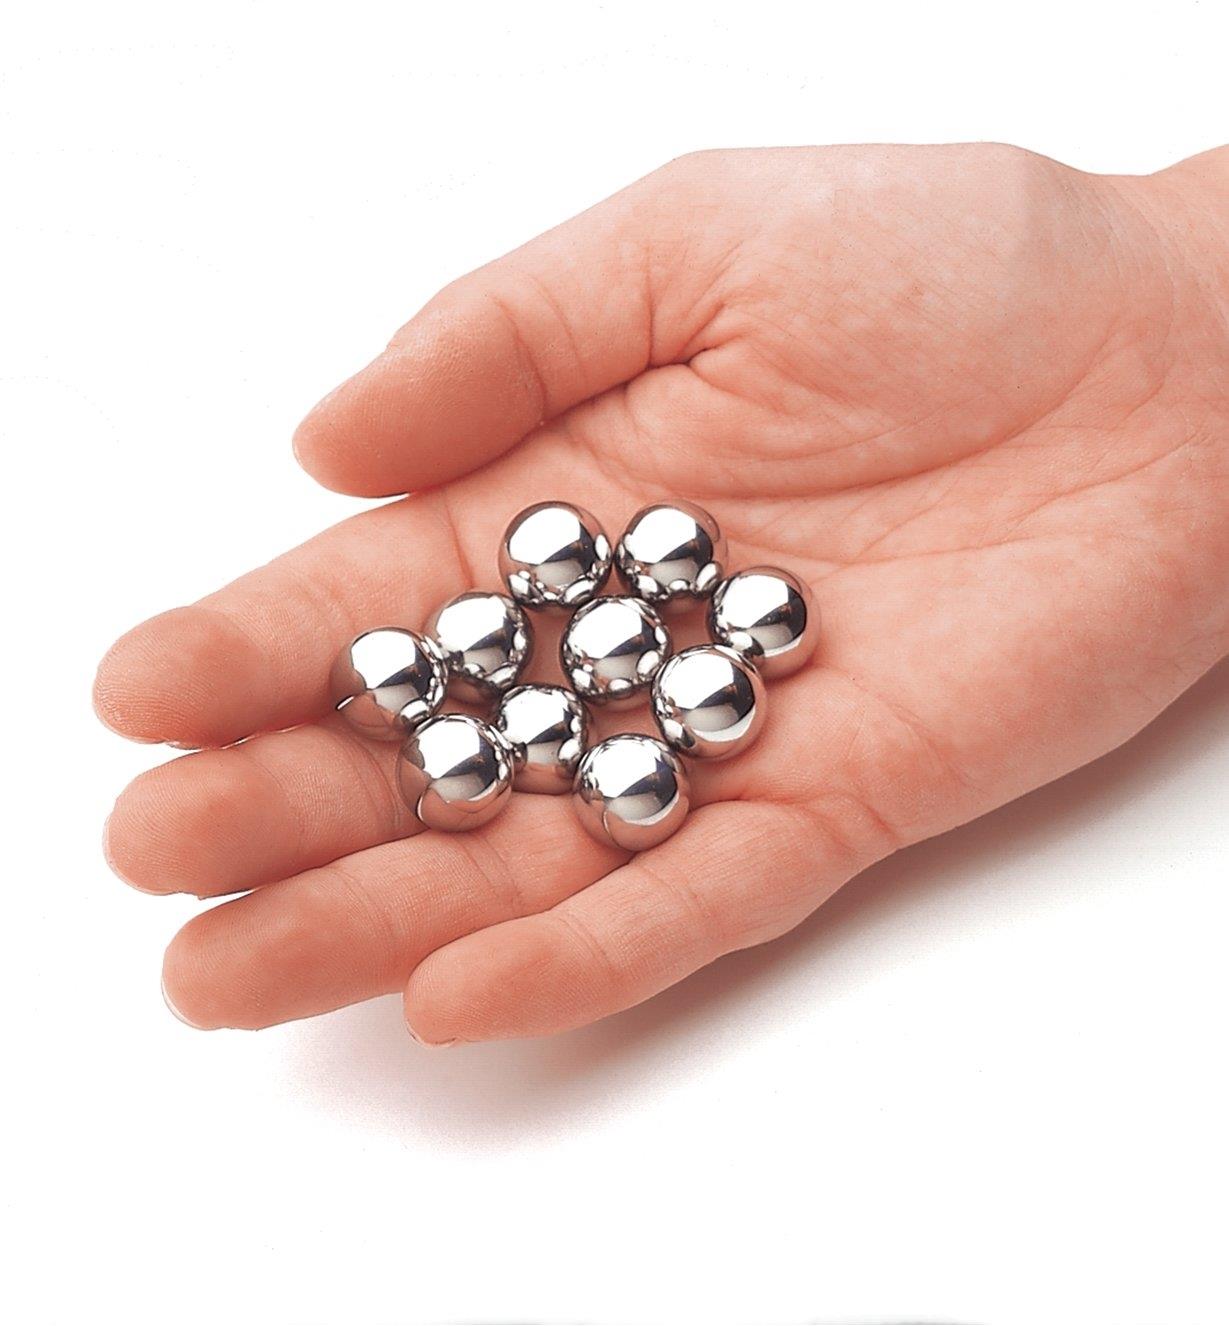 10 chromed steel balls in the palm of a hand